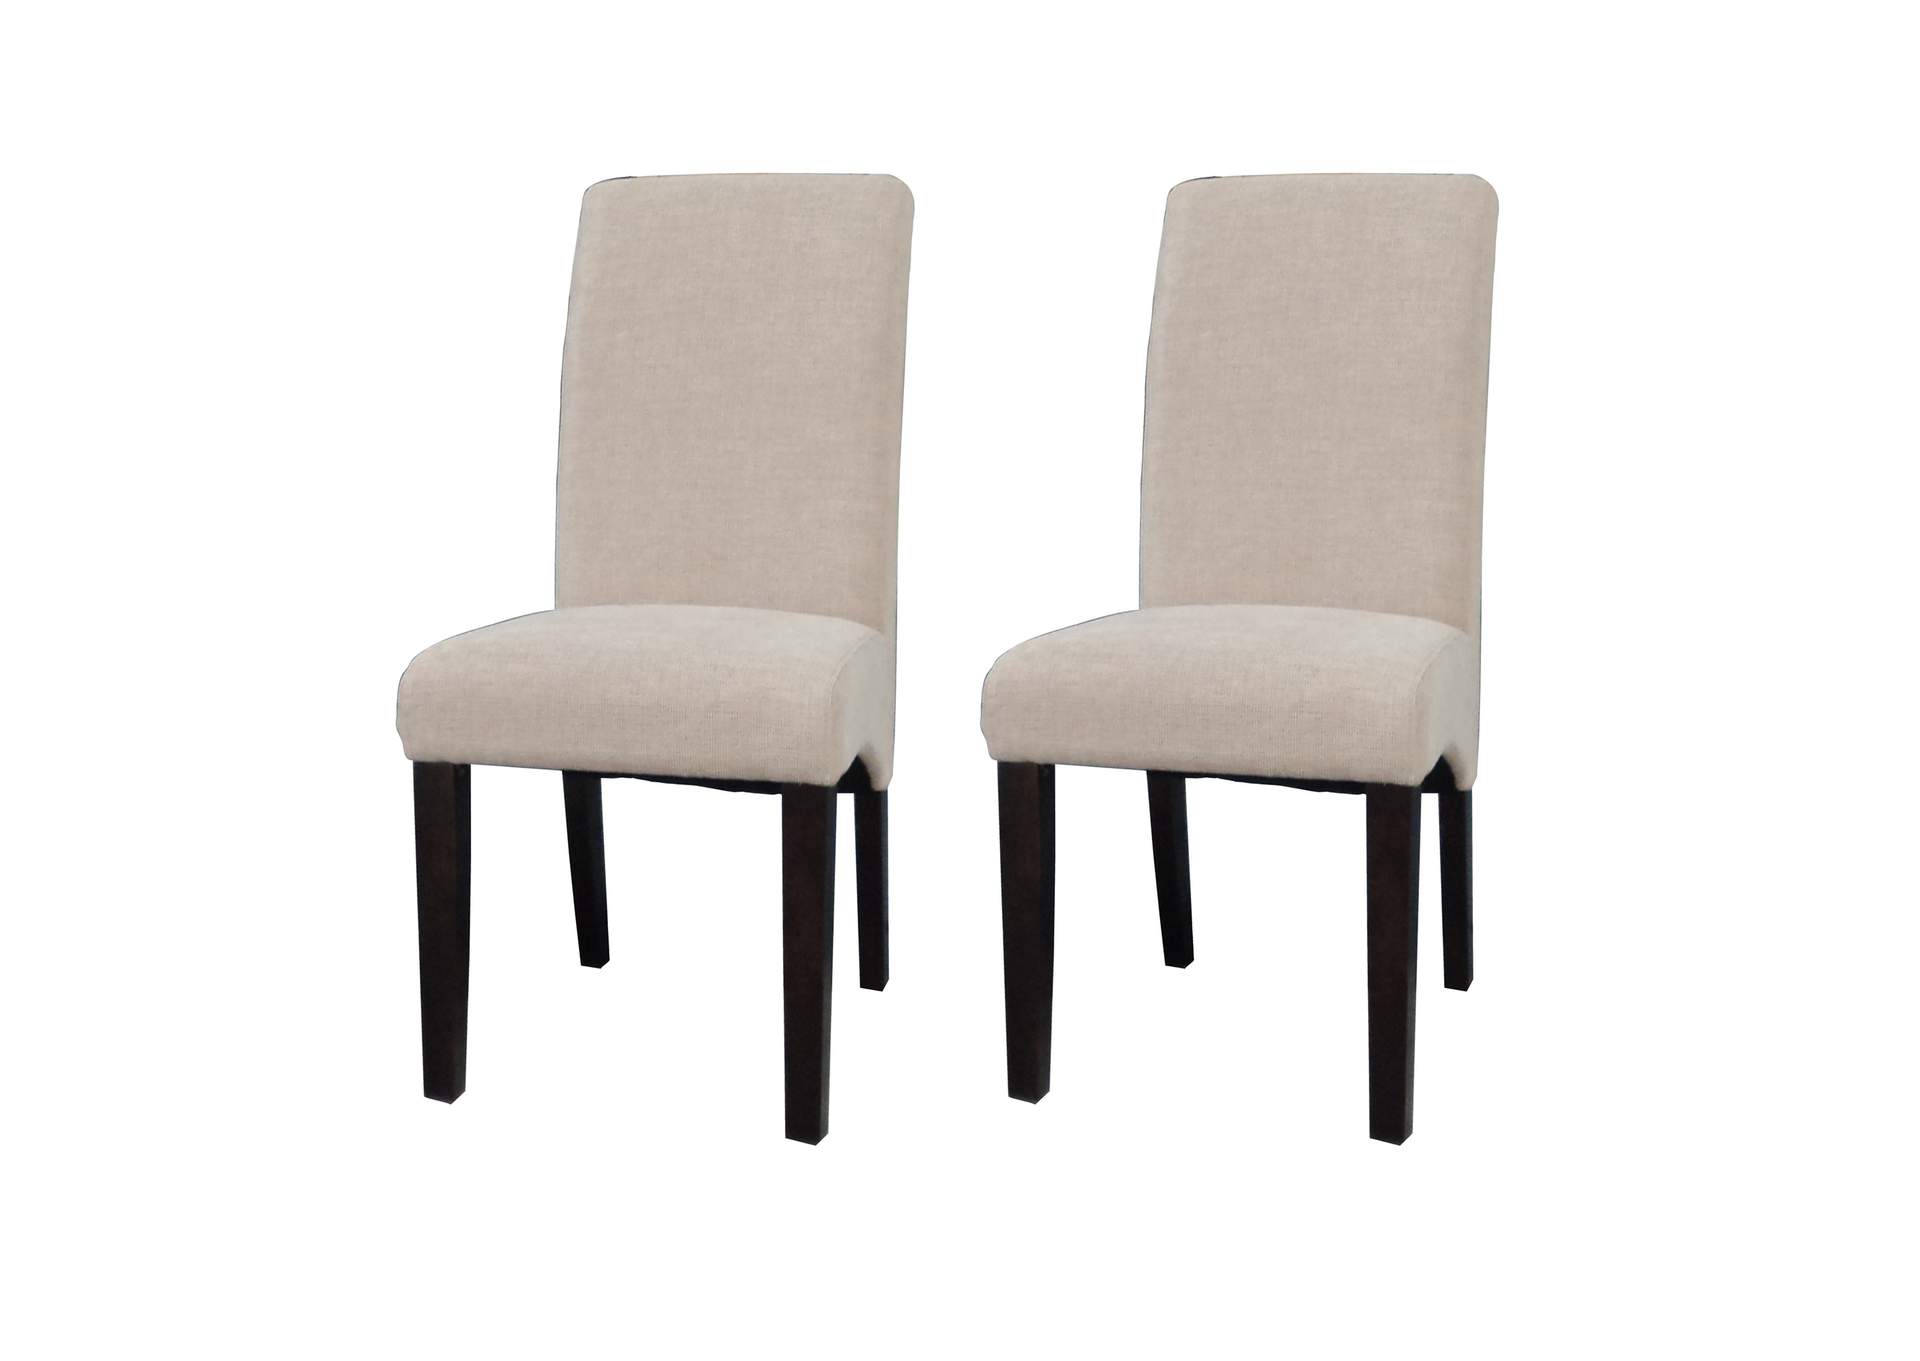 Marcella Satin Espresso Arch Base Parson Side Chair (Set of 2),Chintaly Imports